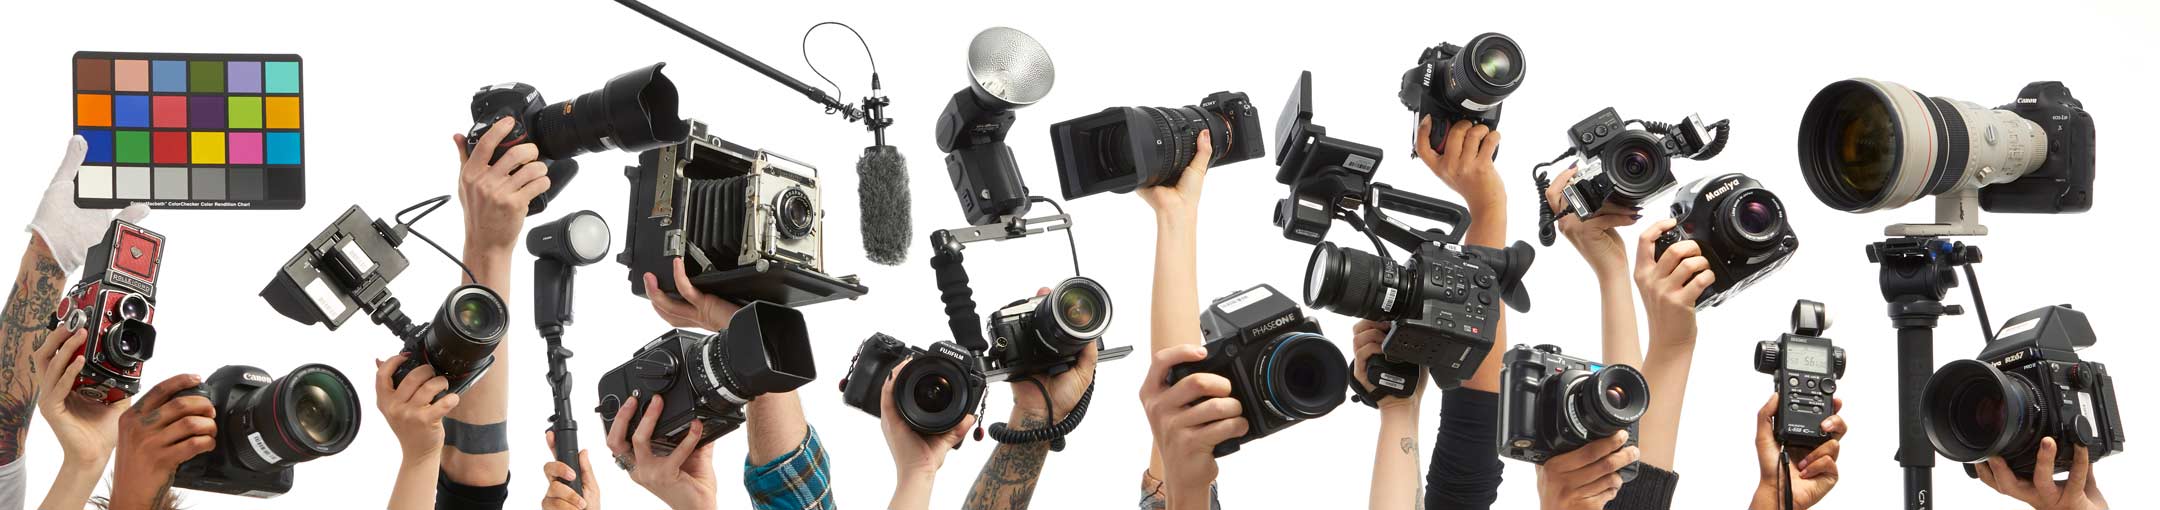 Different cameras being held up by people's hands on a white background